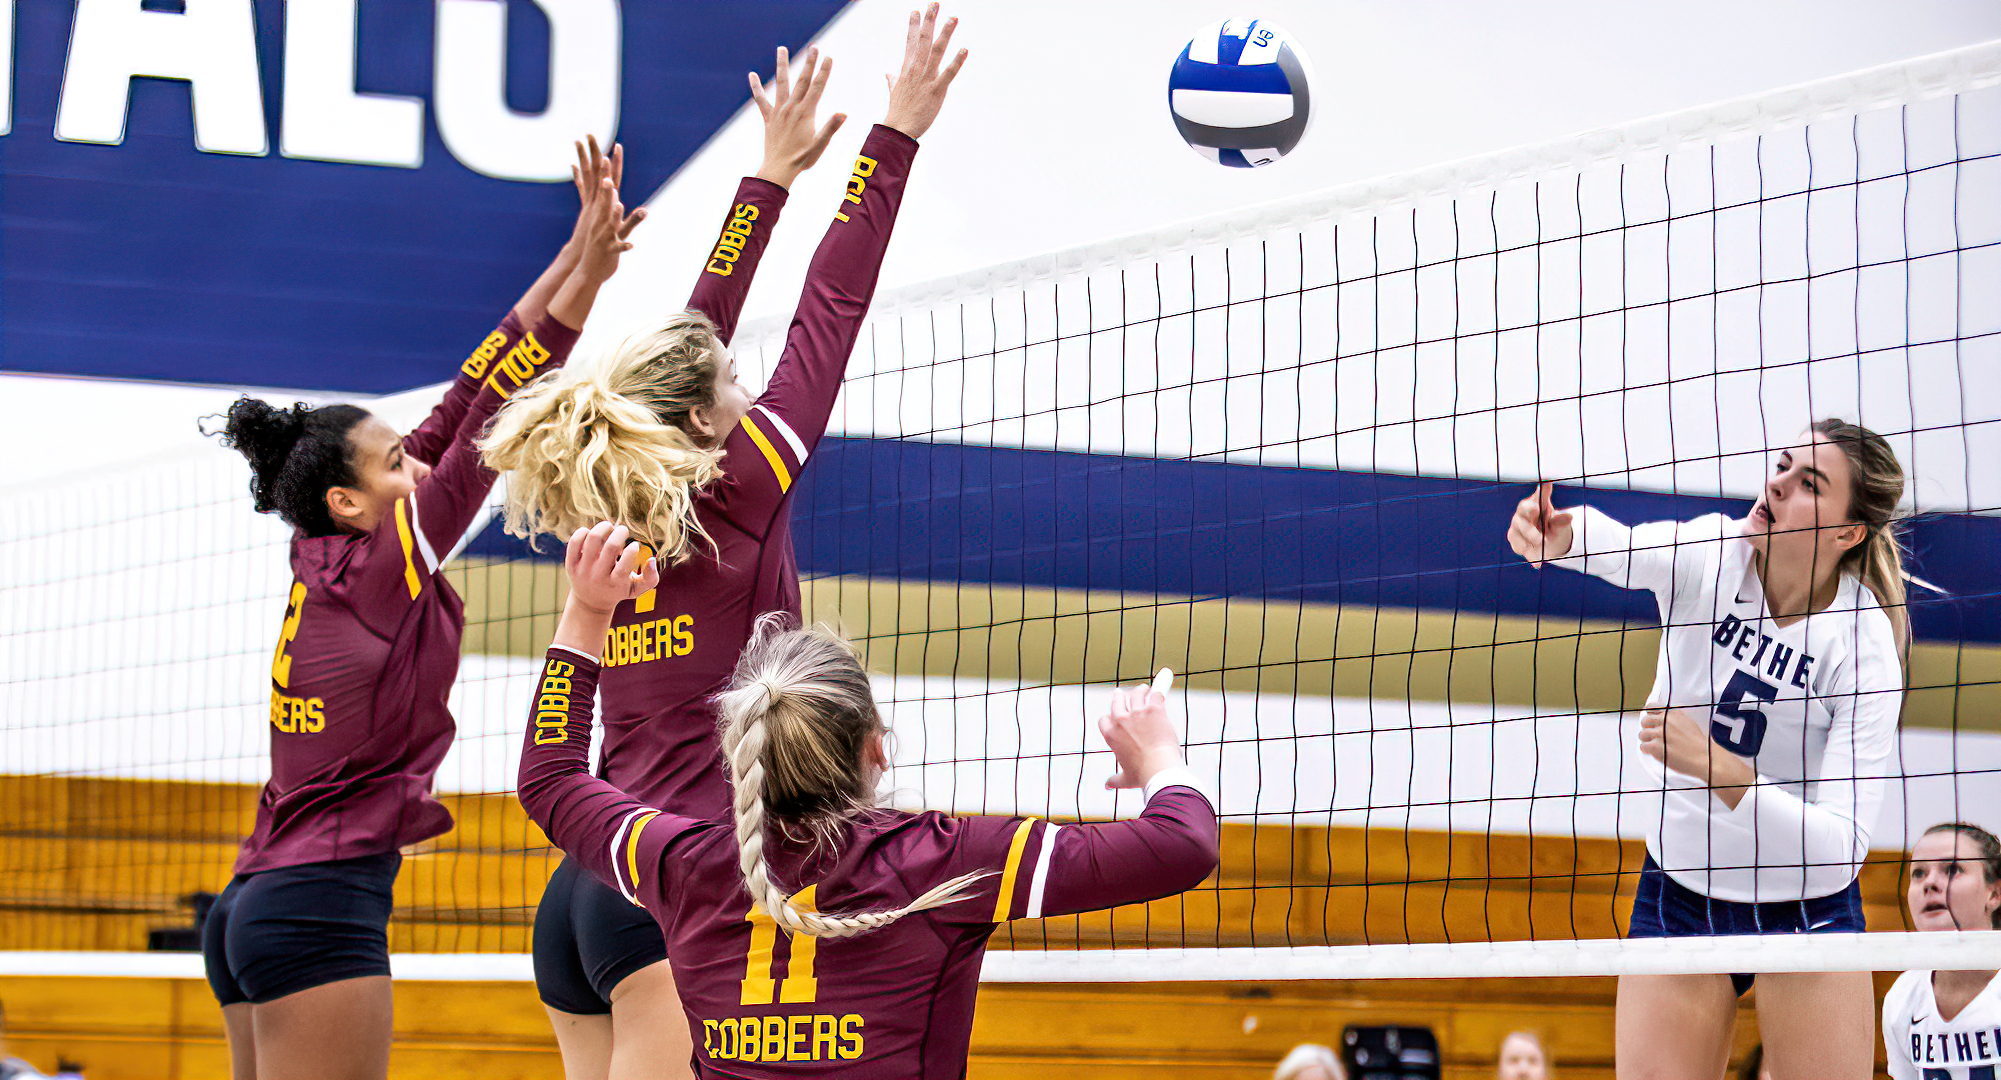 Senior Anna Brakke (L) and freshman Maria Watt go for the block during the Cobbers' conference road match at Bethel. (Photo courtesy of Bethel SID)